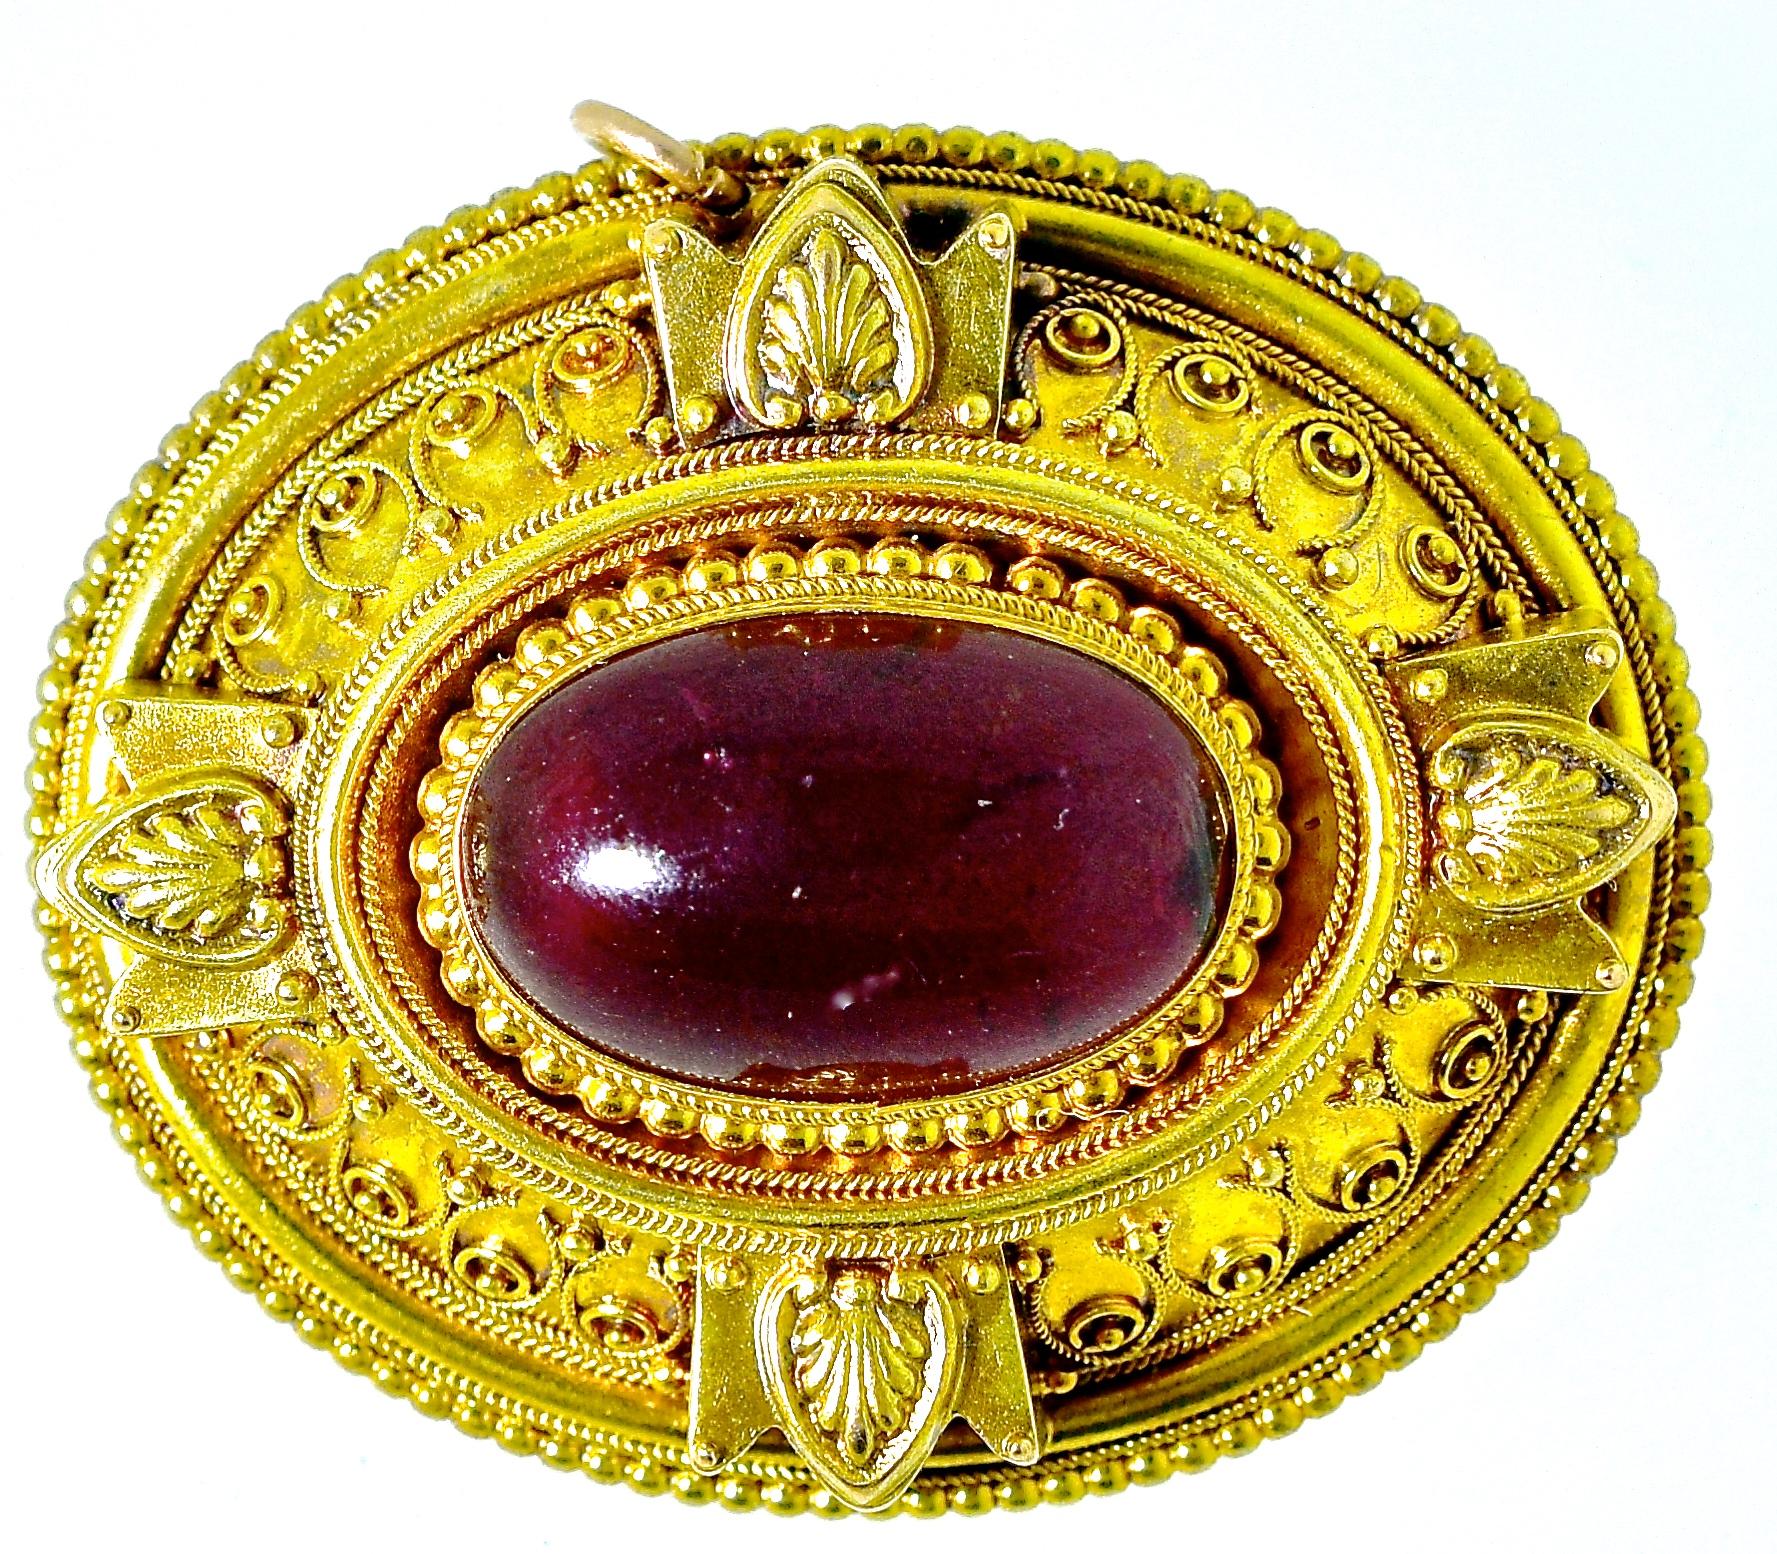 Antique, from the last quarter of the Nineteenth Century, large gold brooch centering a carbuncle natural garnet weighing approximately 9 cts., and surrounded by fine bead and wire work, Etruscan Revival.  On the verso, is the original hair receiver